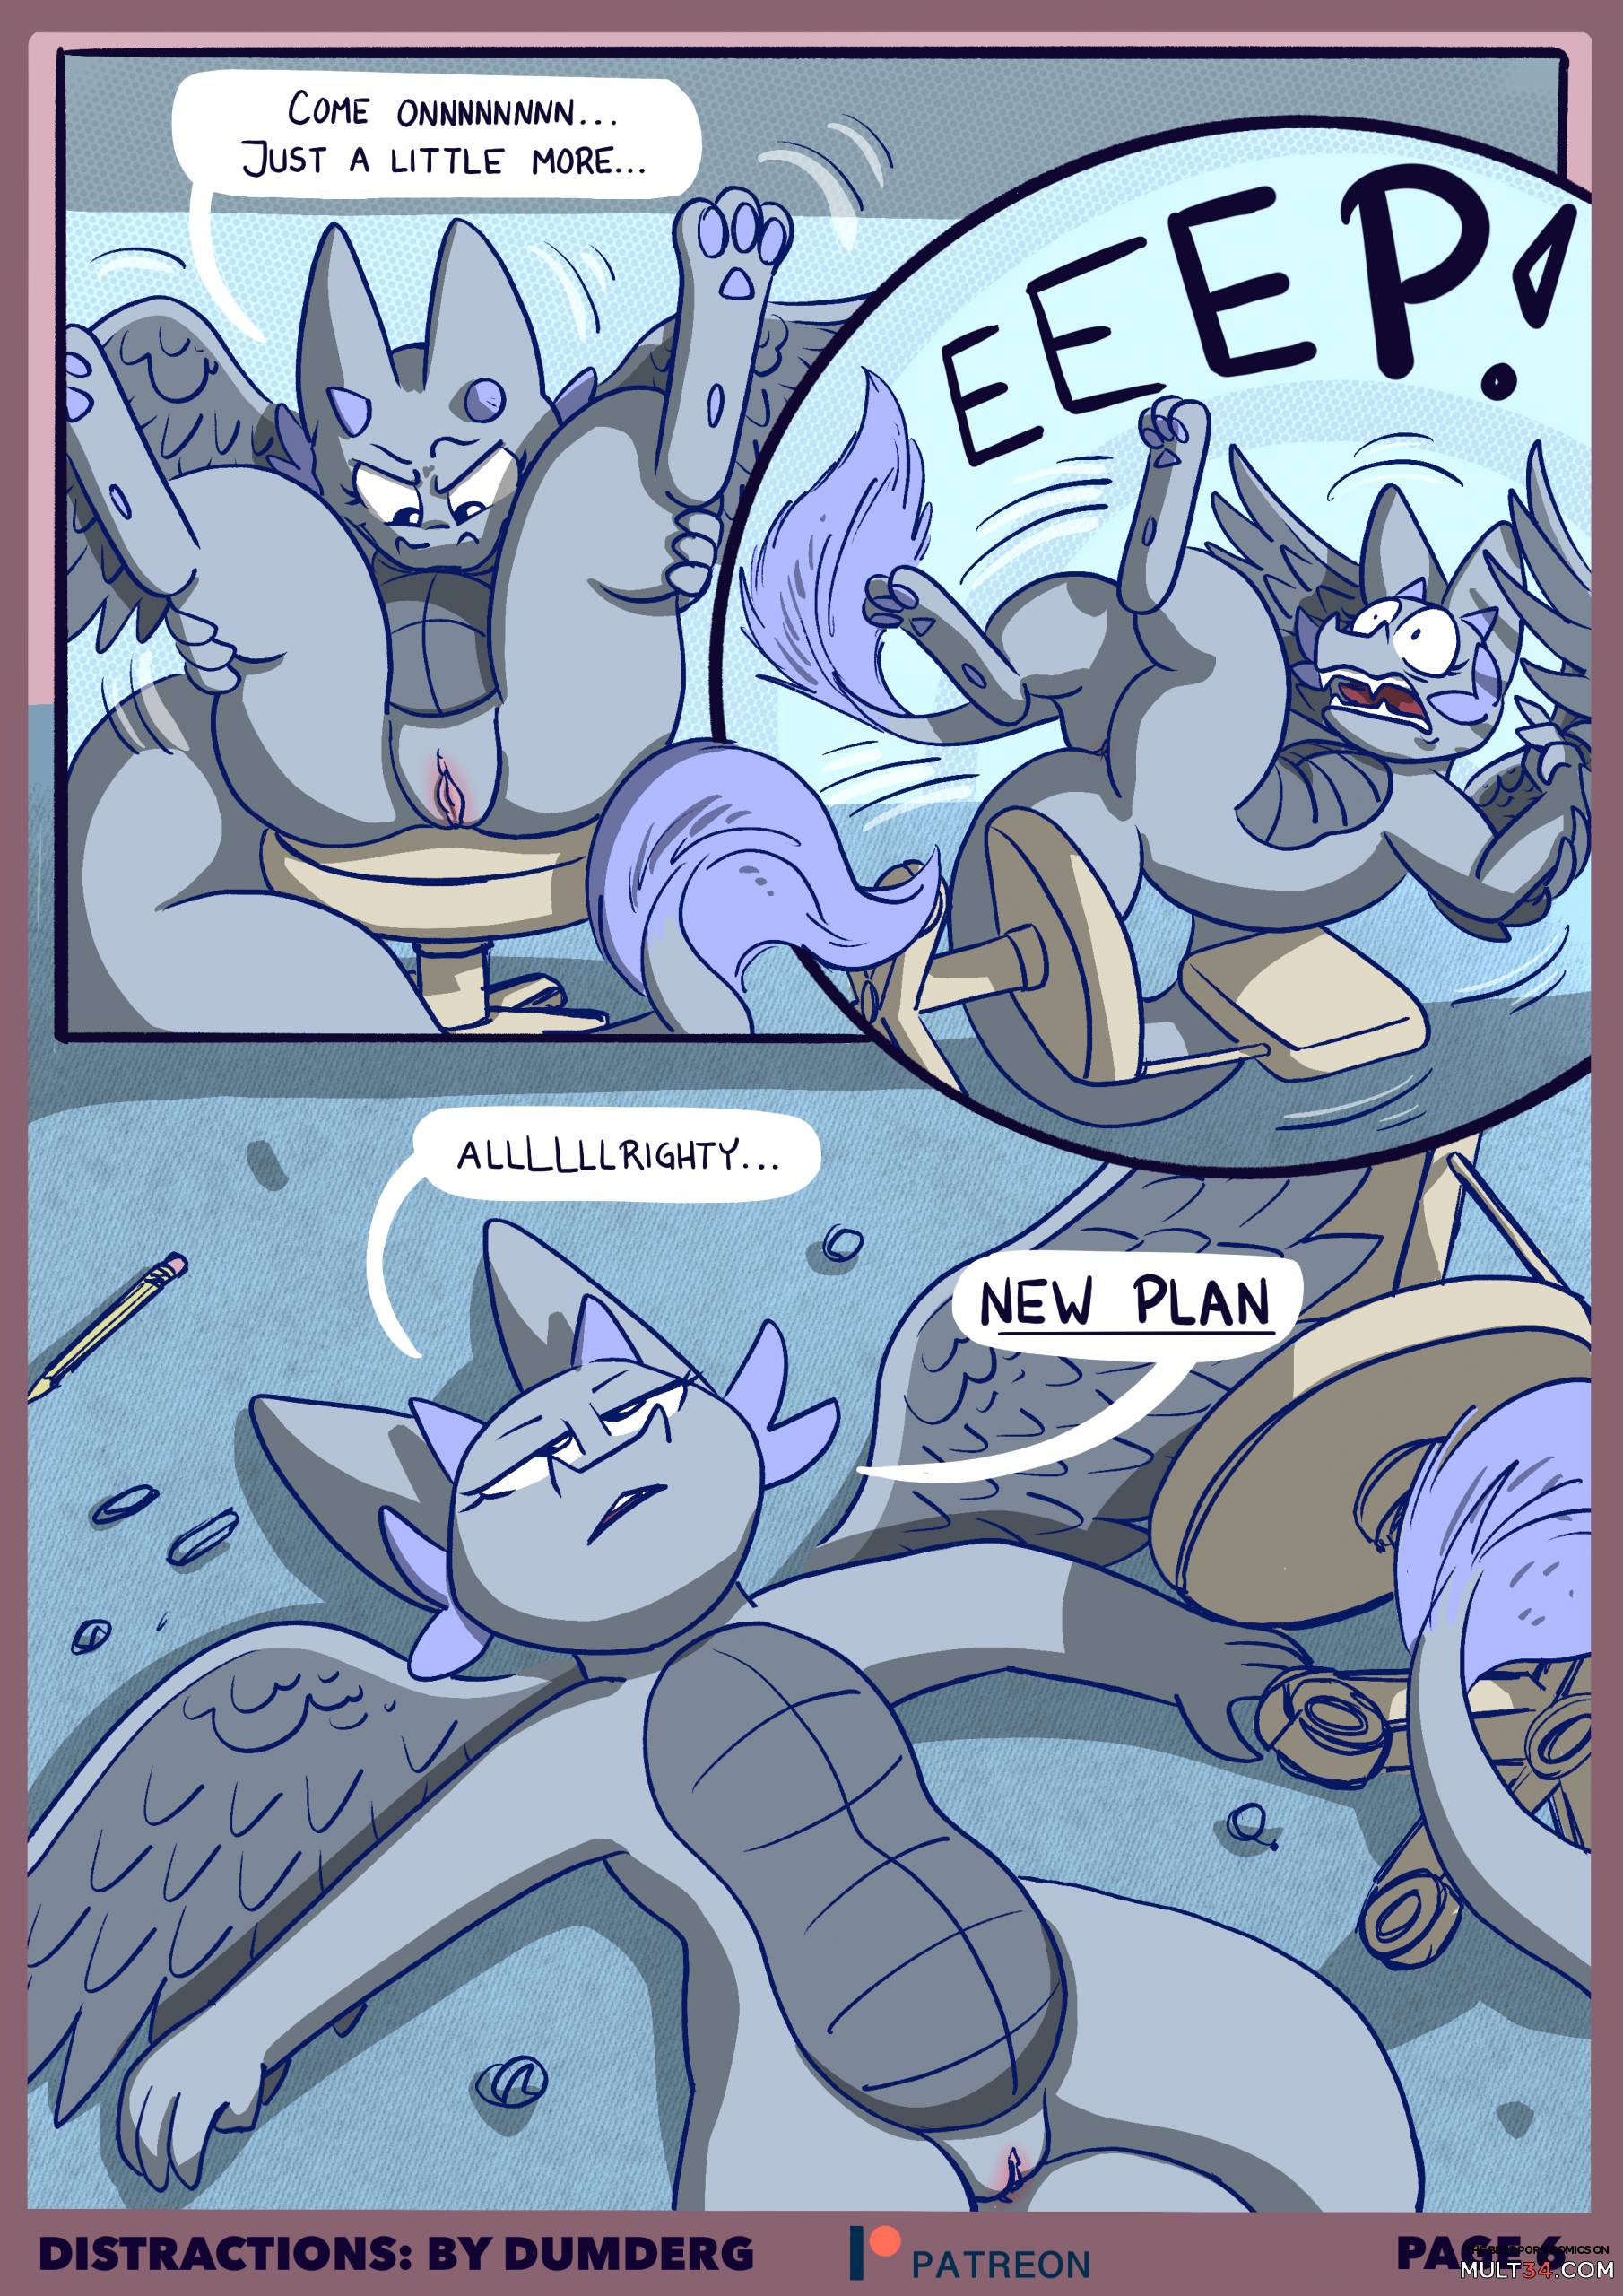 Distractions - DumDerg page 7